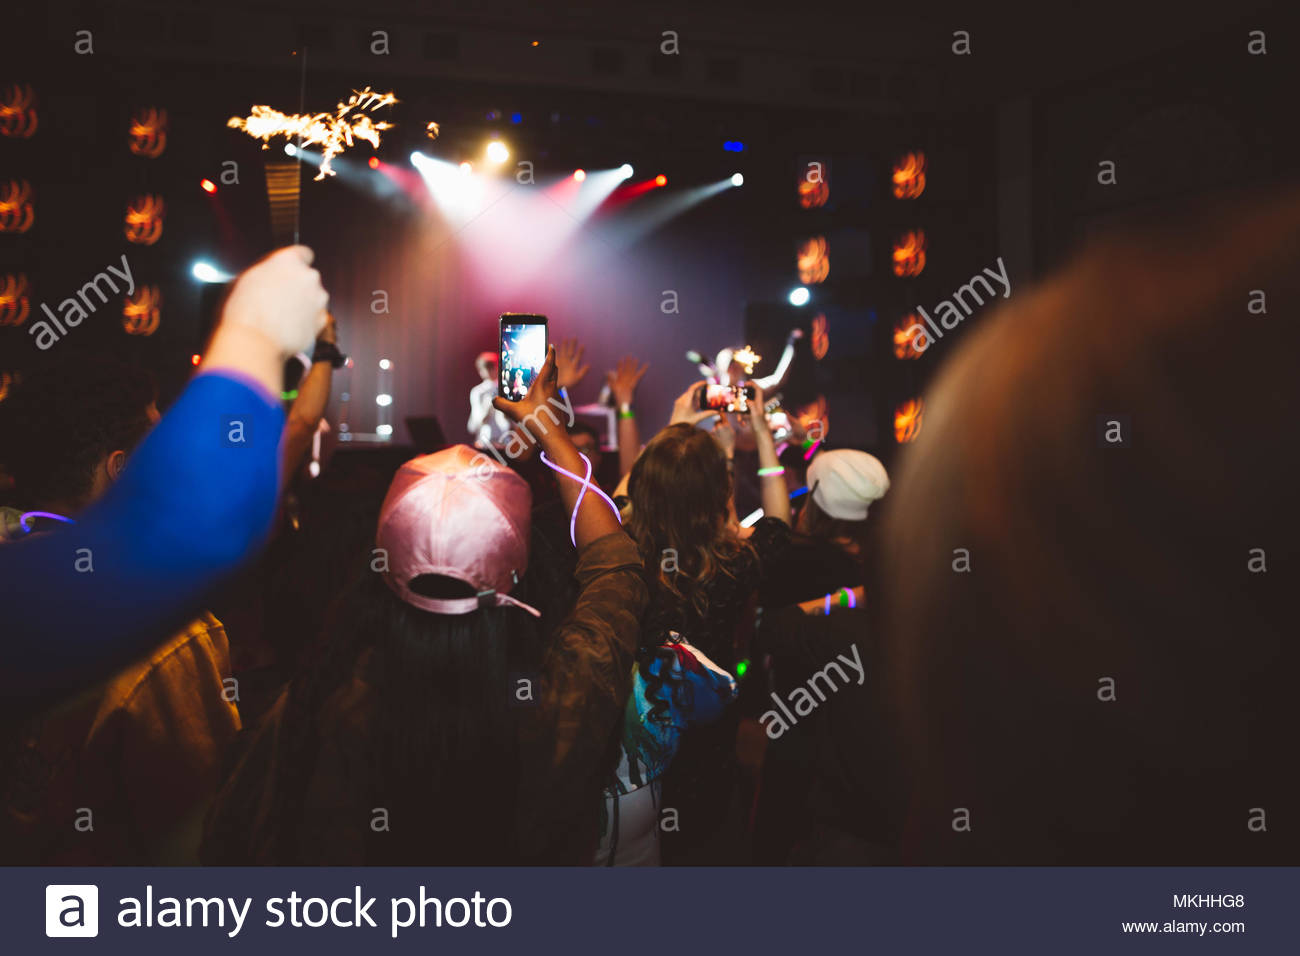 Milennials with smart phones in crowd videoing musicians performing in nightclub Stock Photo